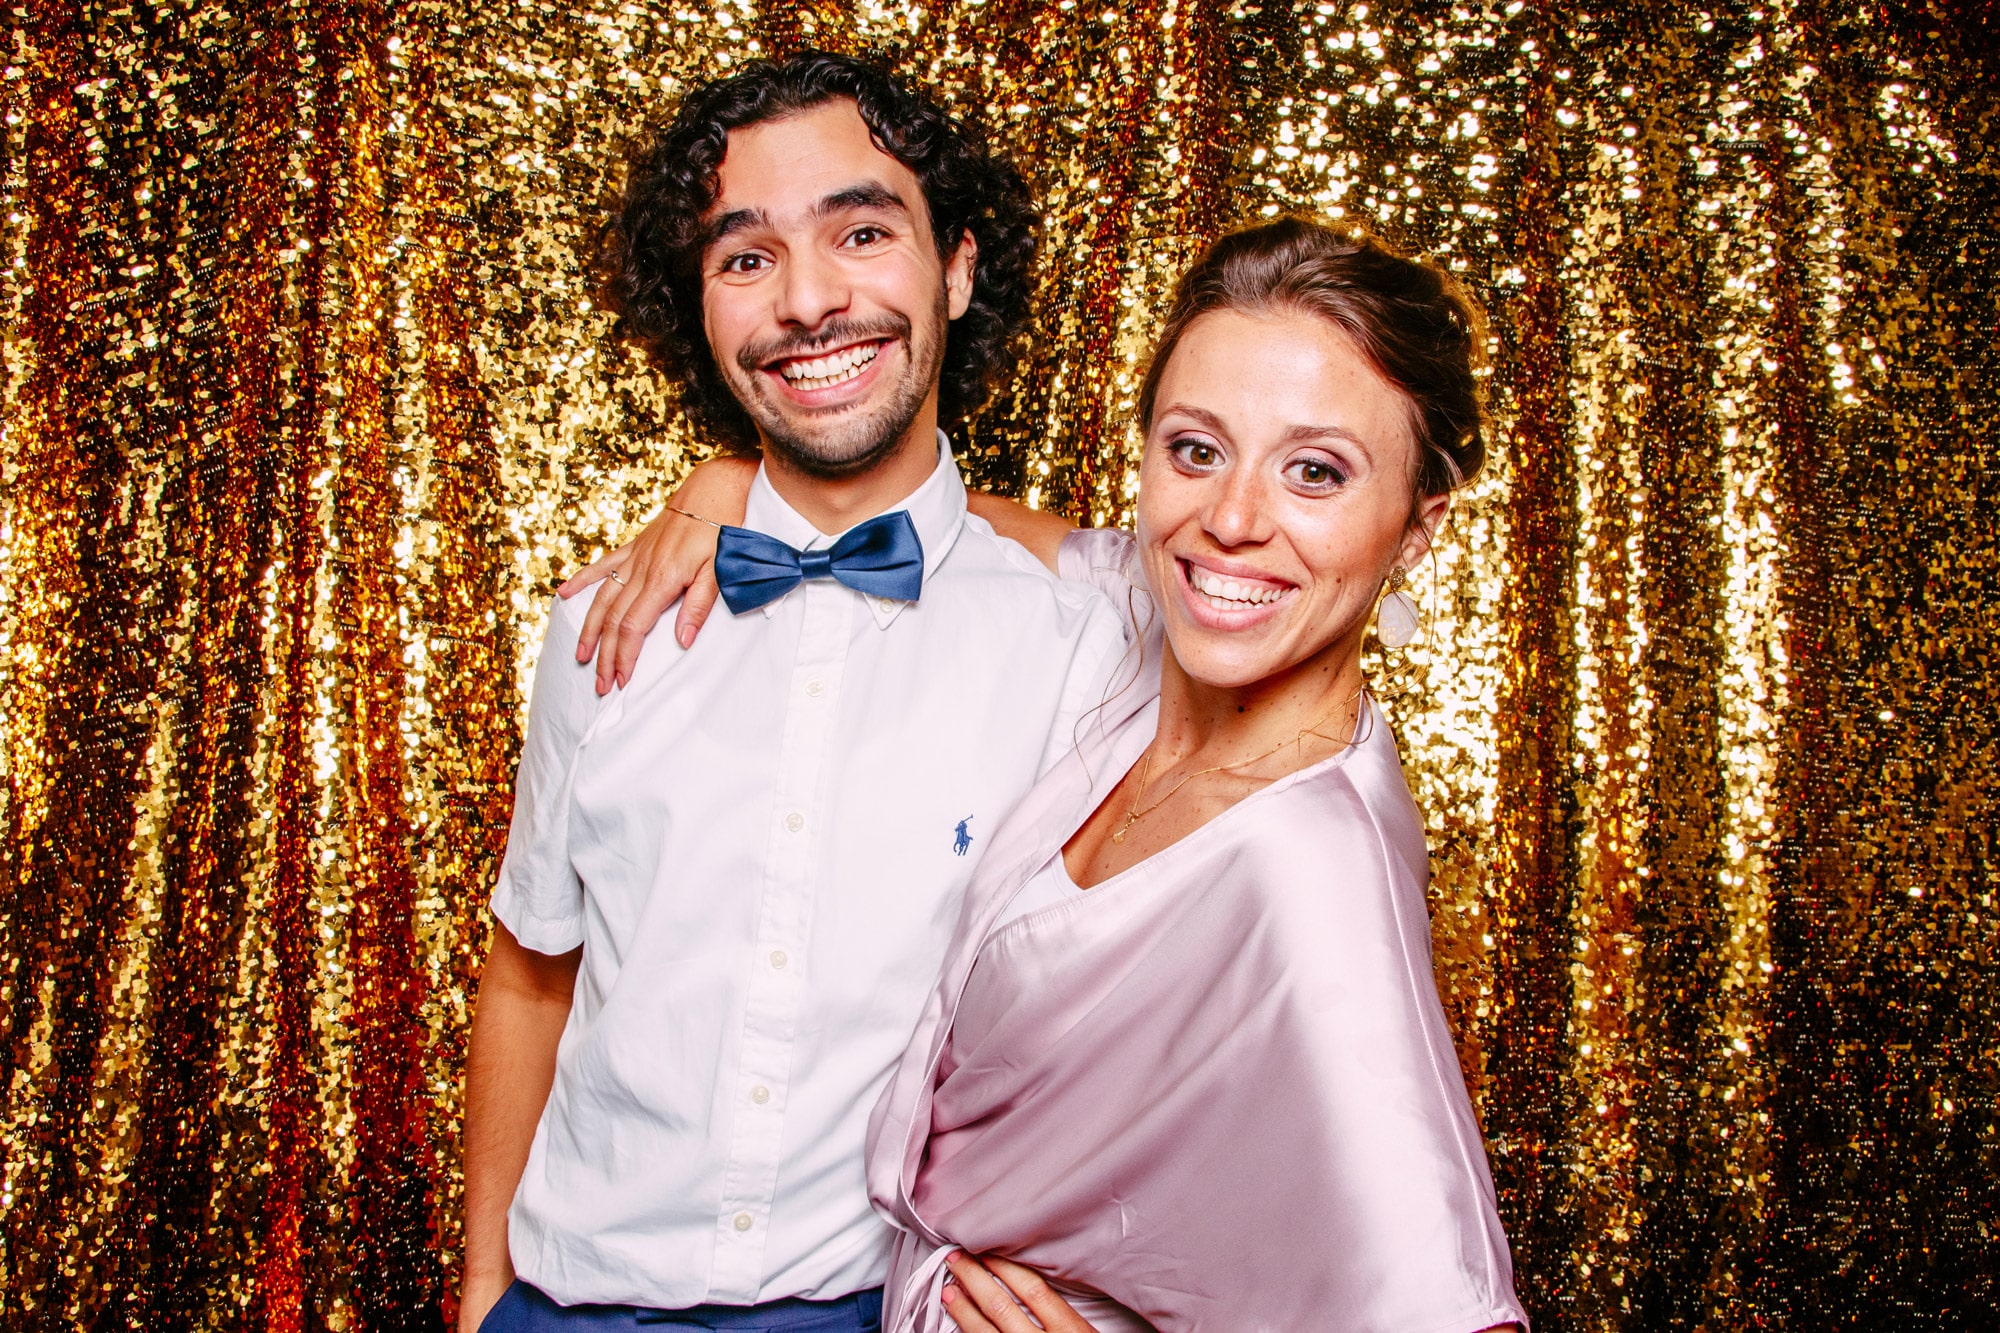 A casually chic man and woman pose for a photo against a gold background.